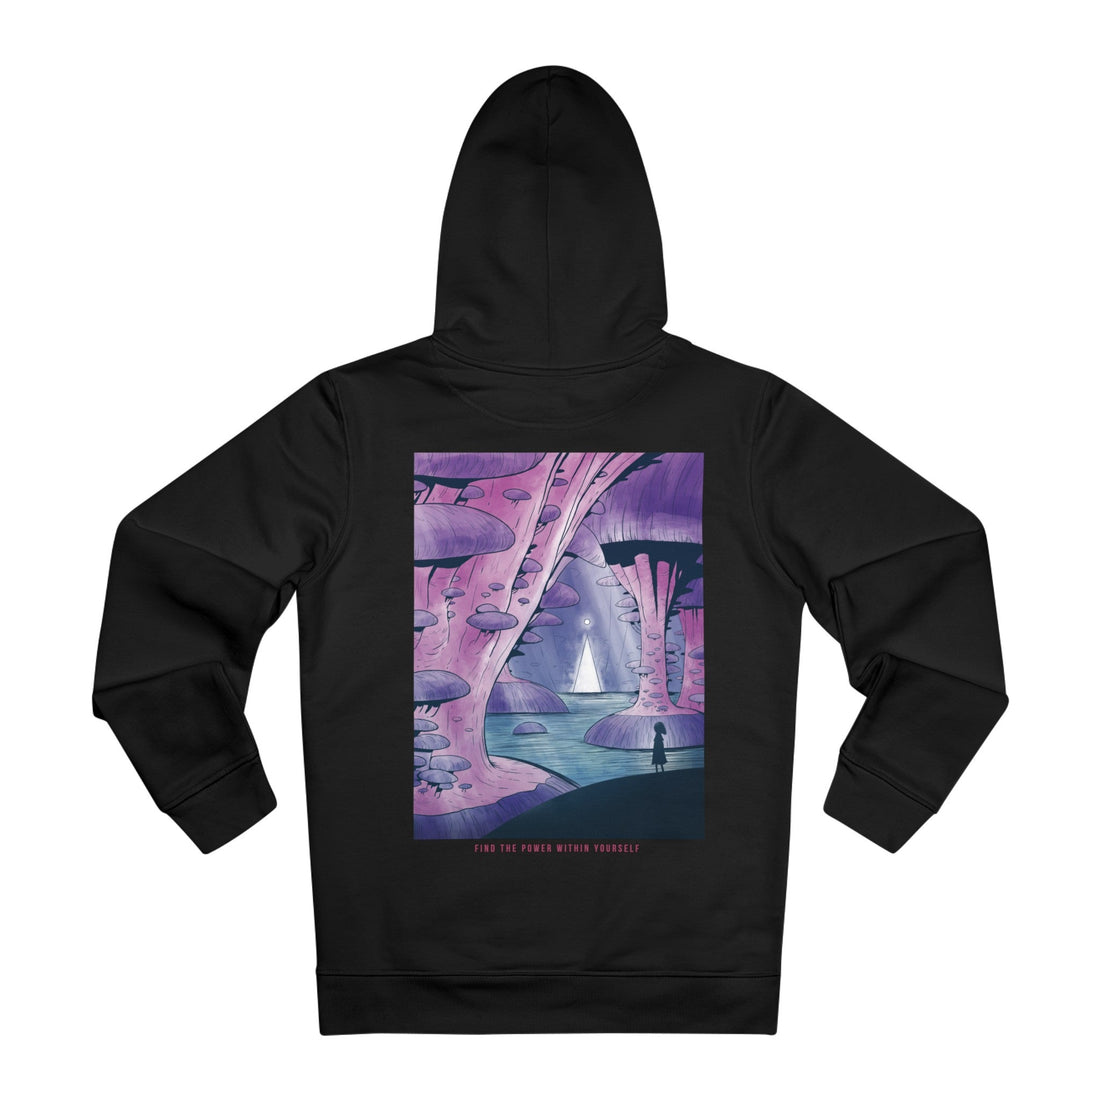 Printify Hoodie Black / M Find the Power within yourself - Watercolor Fantasy - Hoodie - Back Design